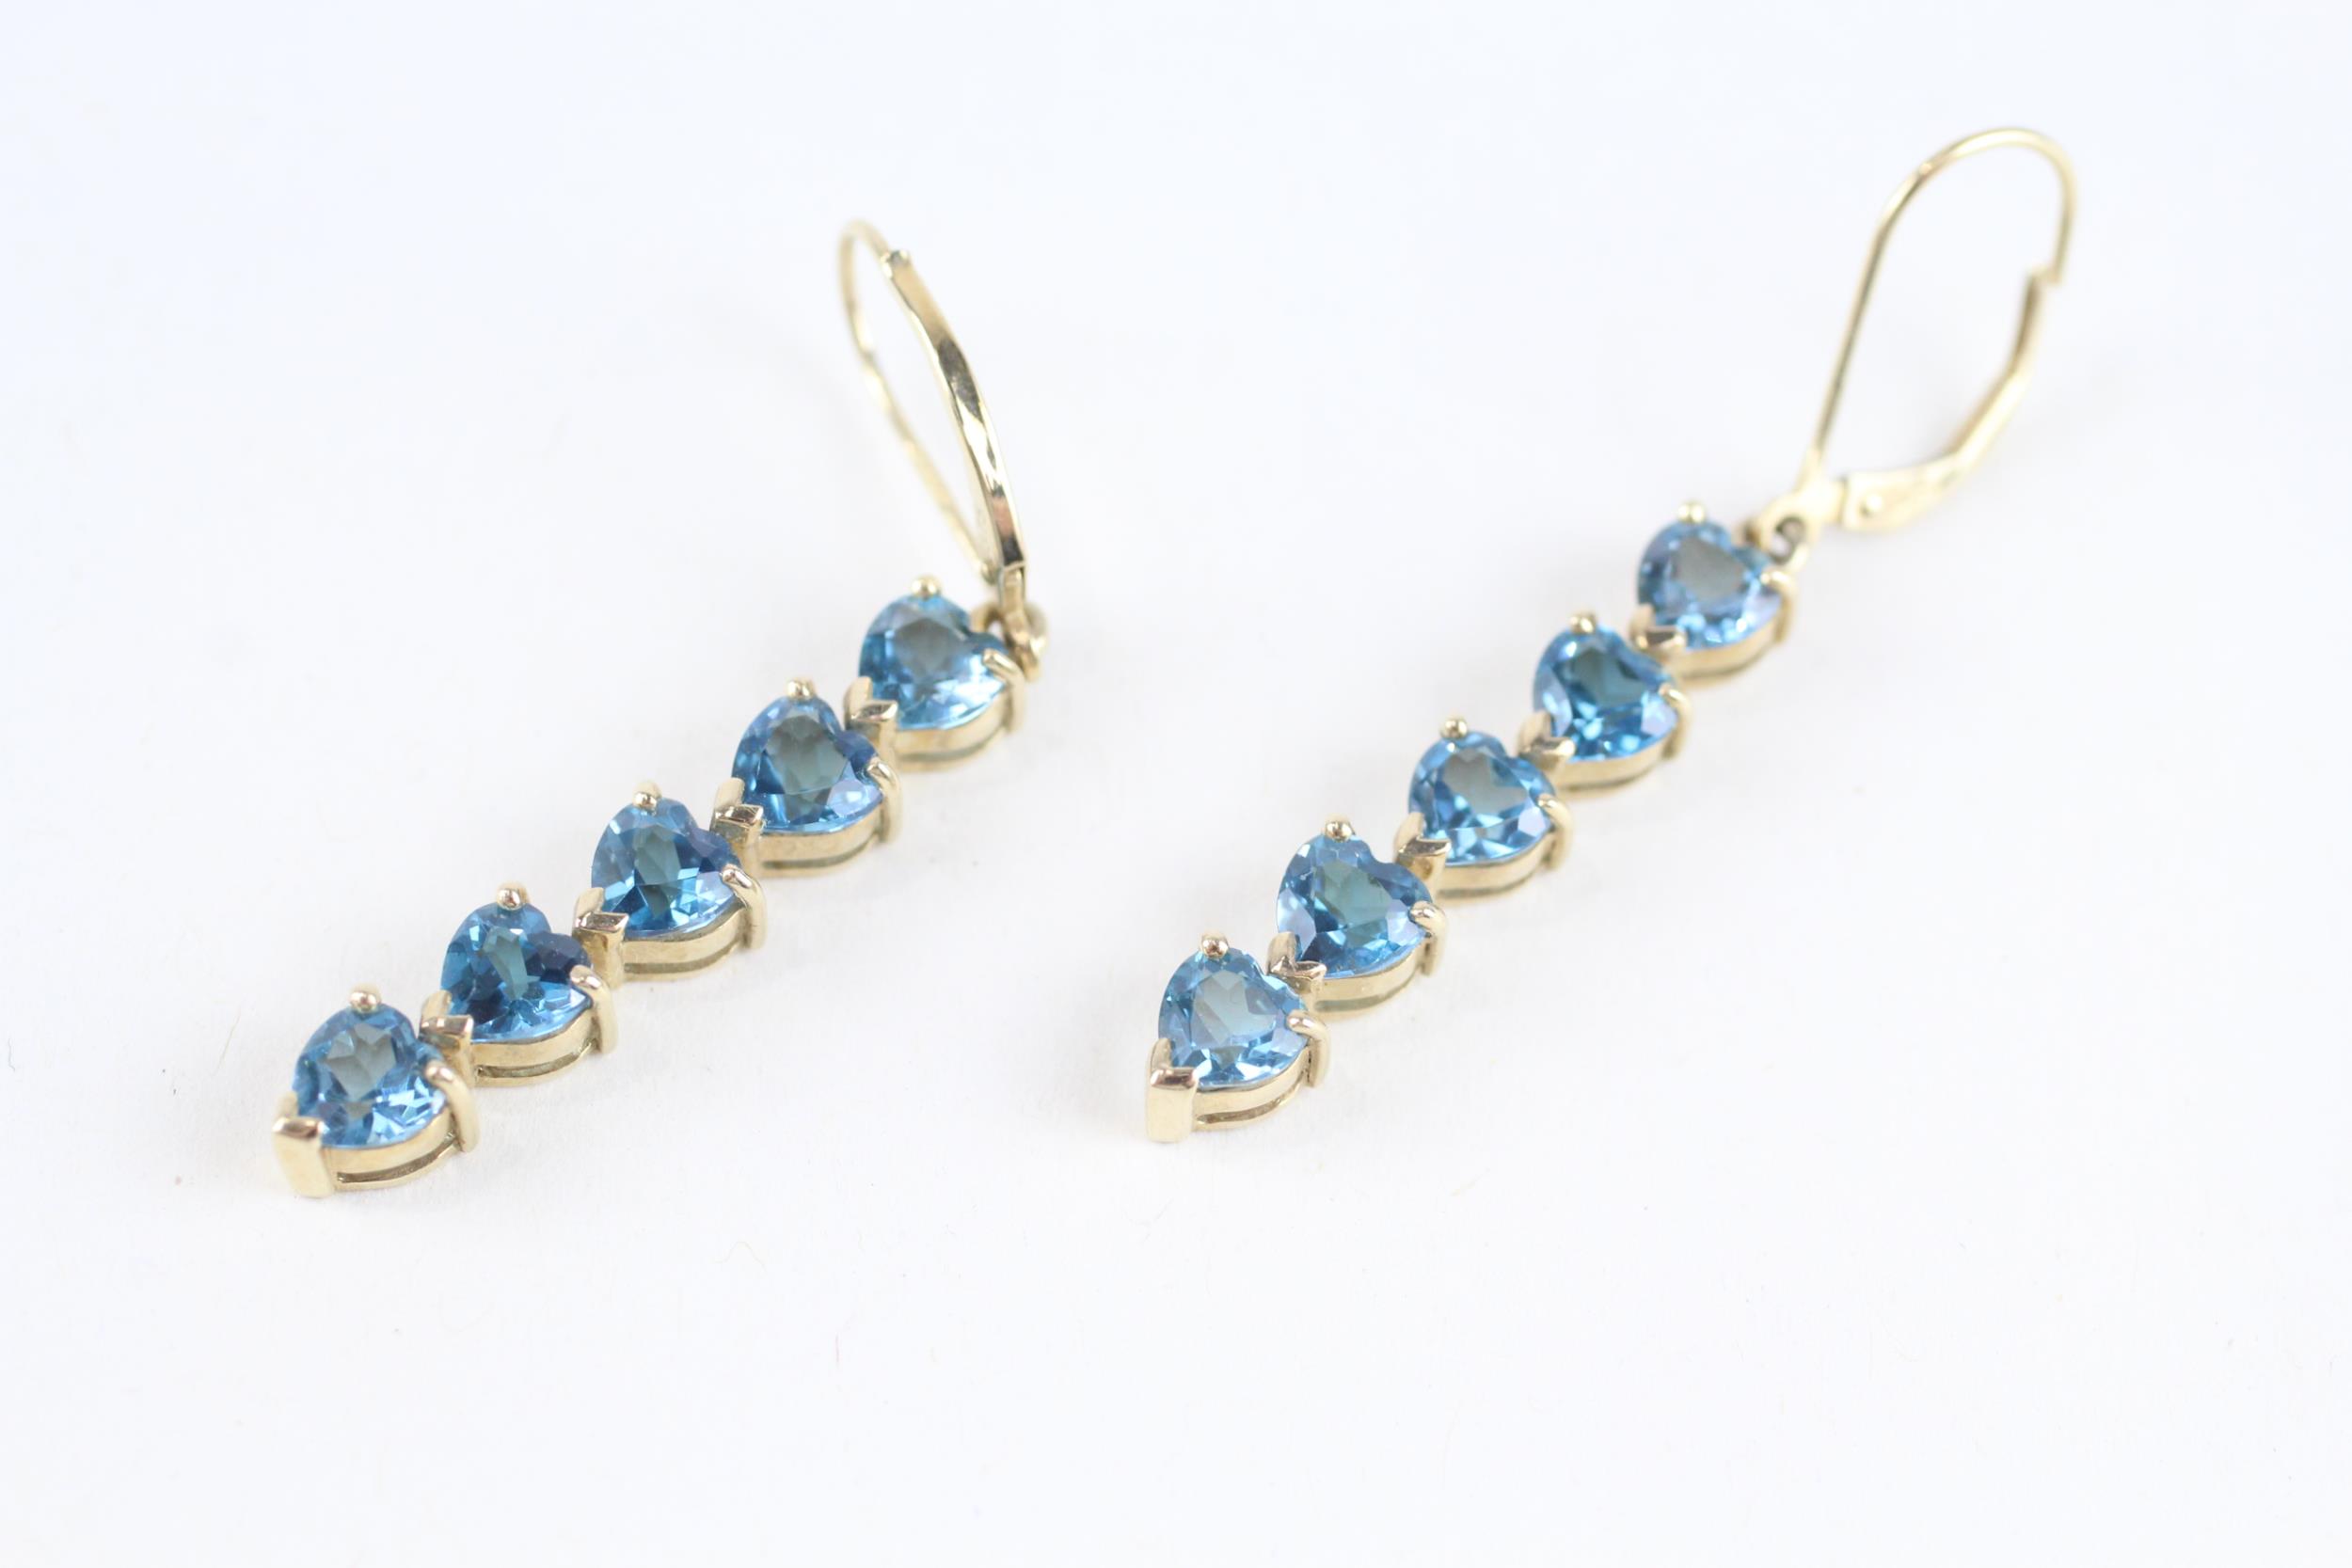 9ct gold heart shaped cut blue topaz drop earrings with lever backs - 5.1 g